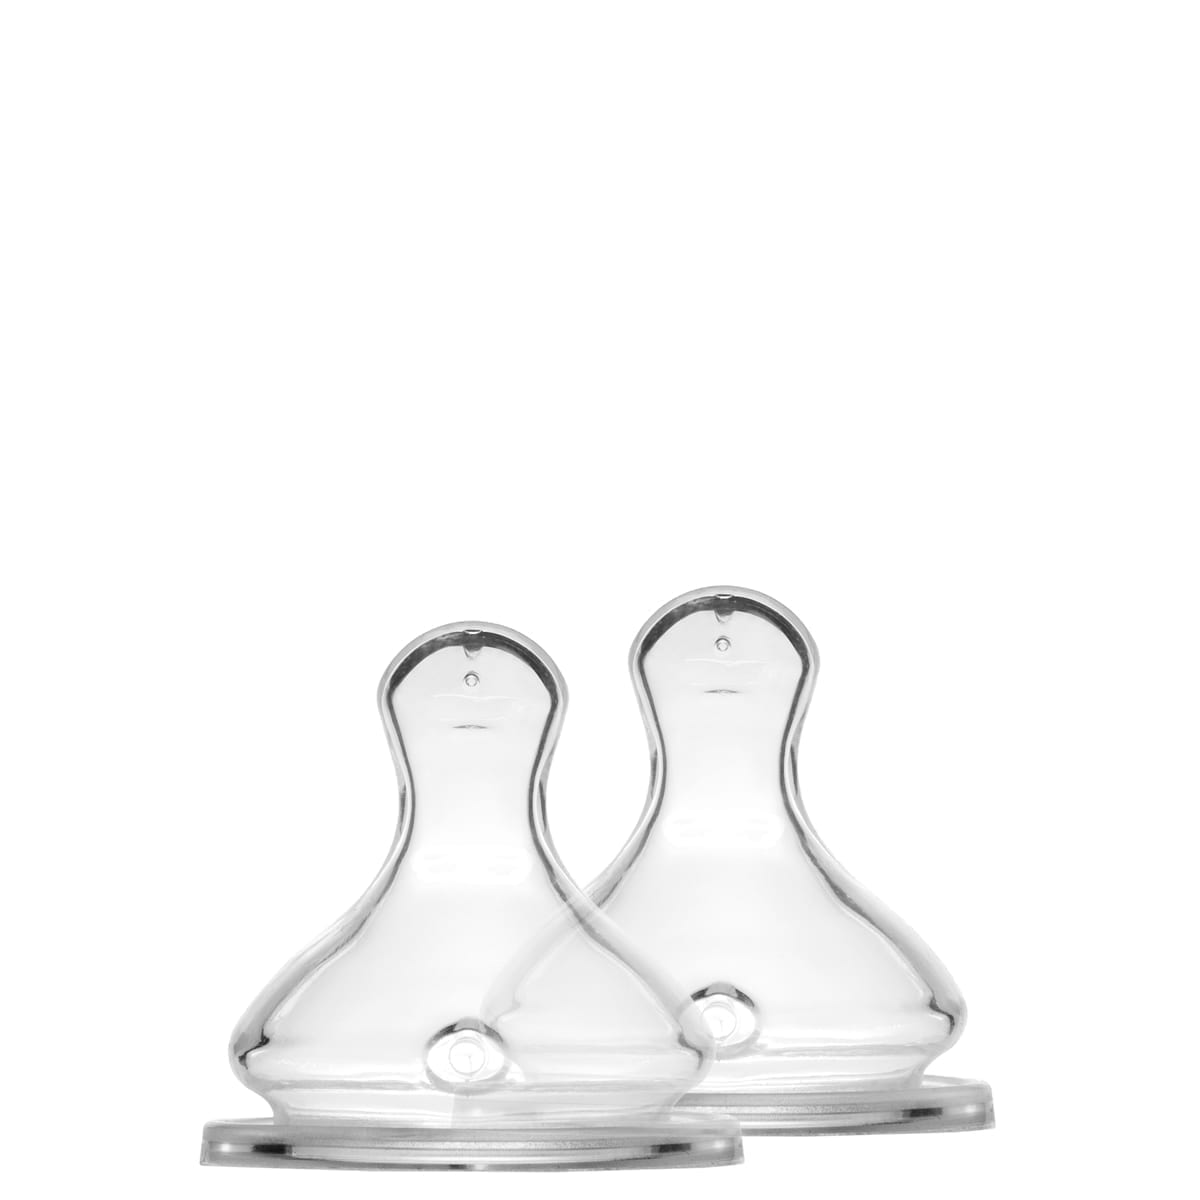 A pair of Elhée France fast flow teats on a white background.